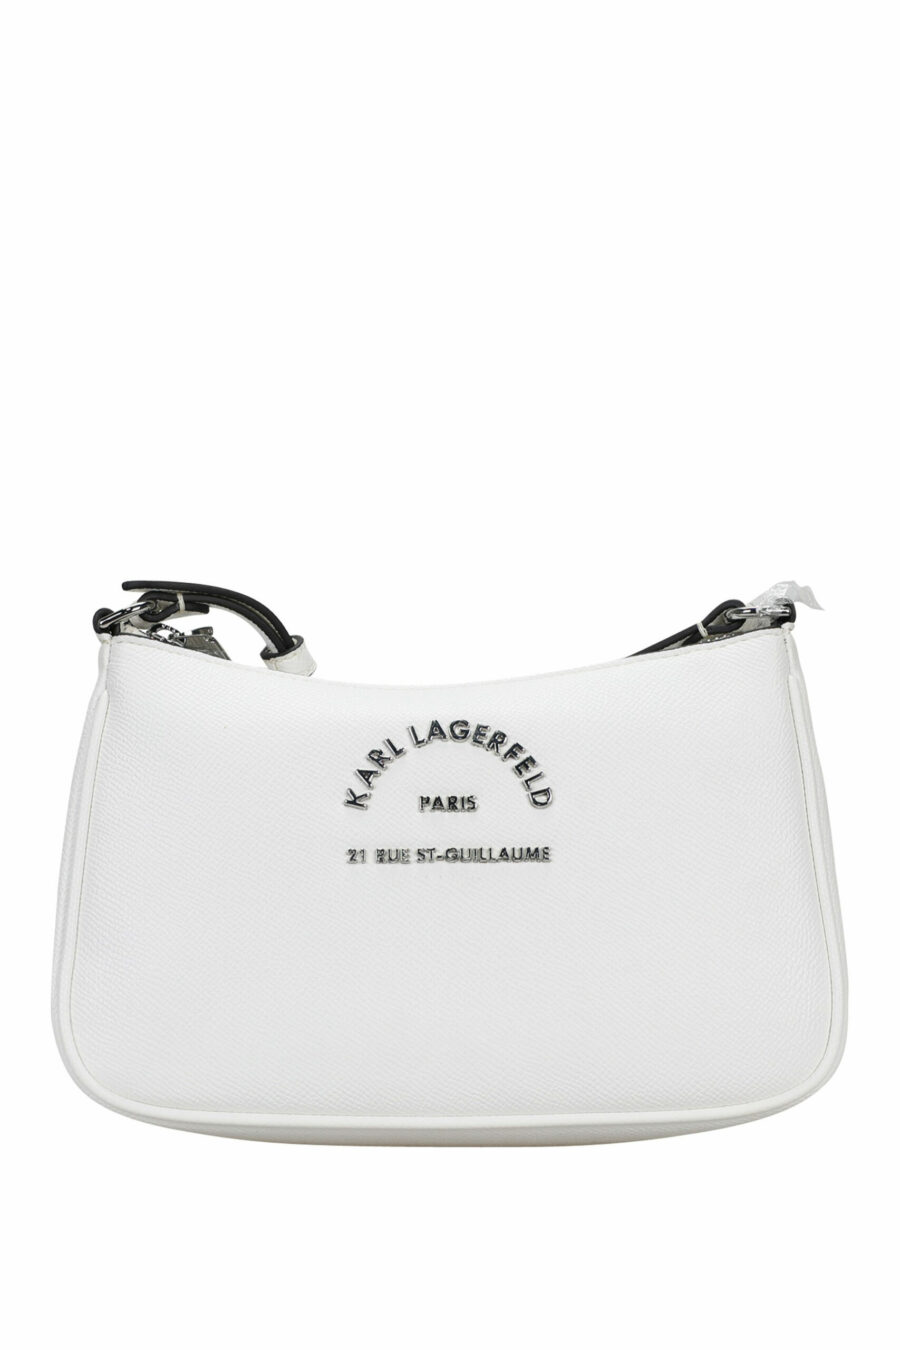 White shoulder bag with mini-logo "rue st guillaume" - 8720744417071 scaled